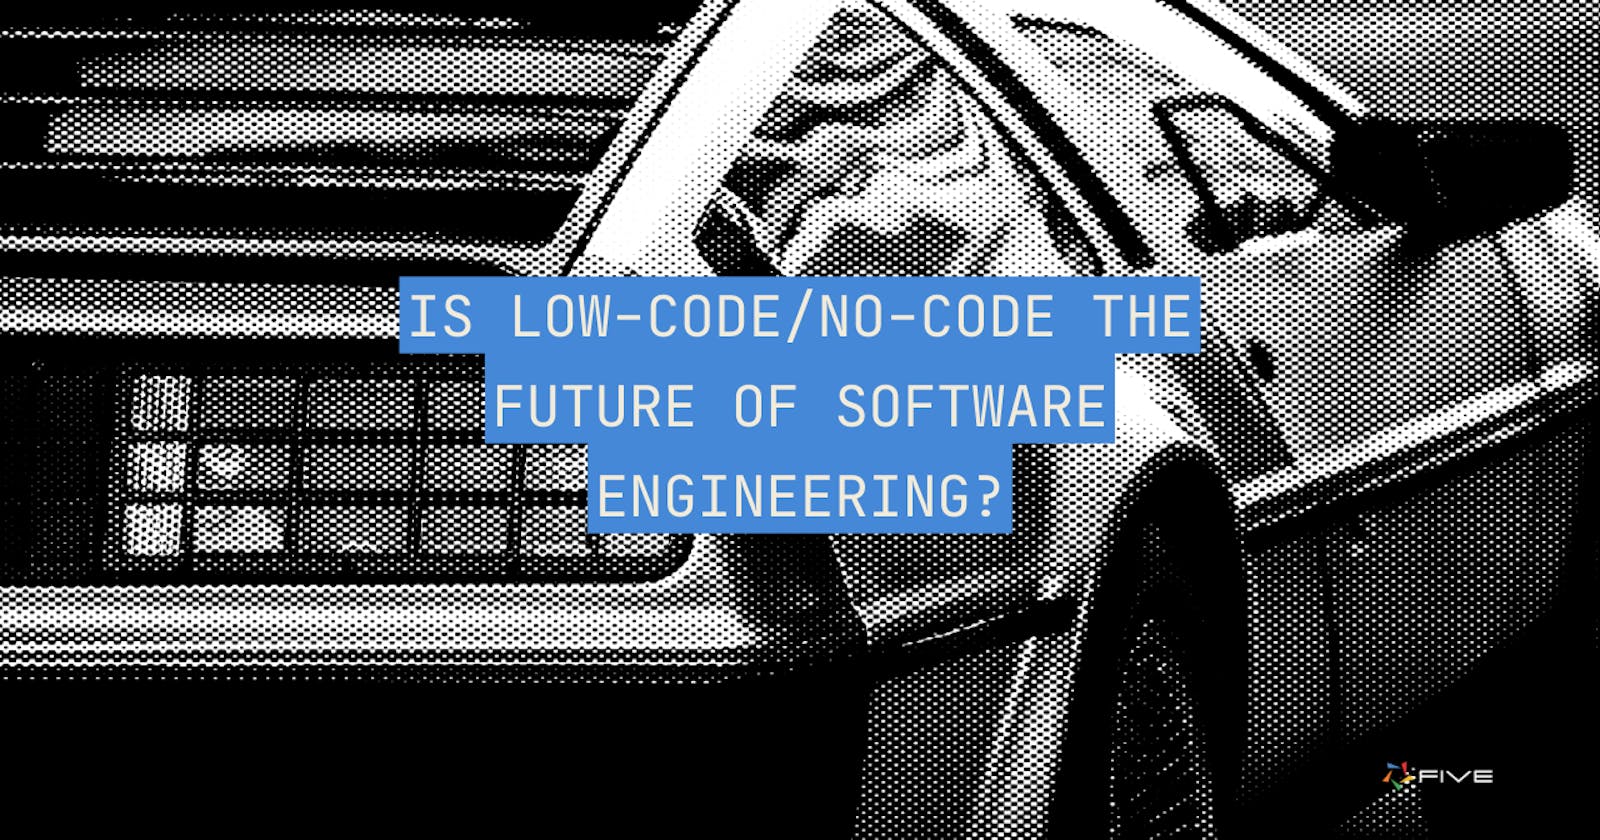 Is Low-Code / No-Code The Future of Software Engineering?